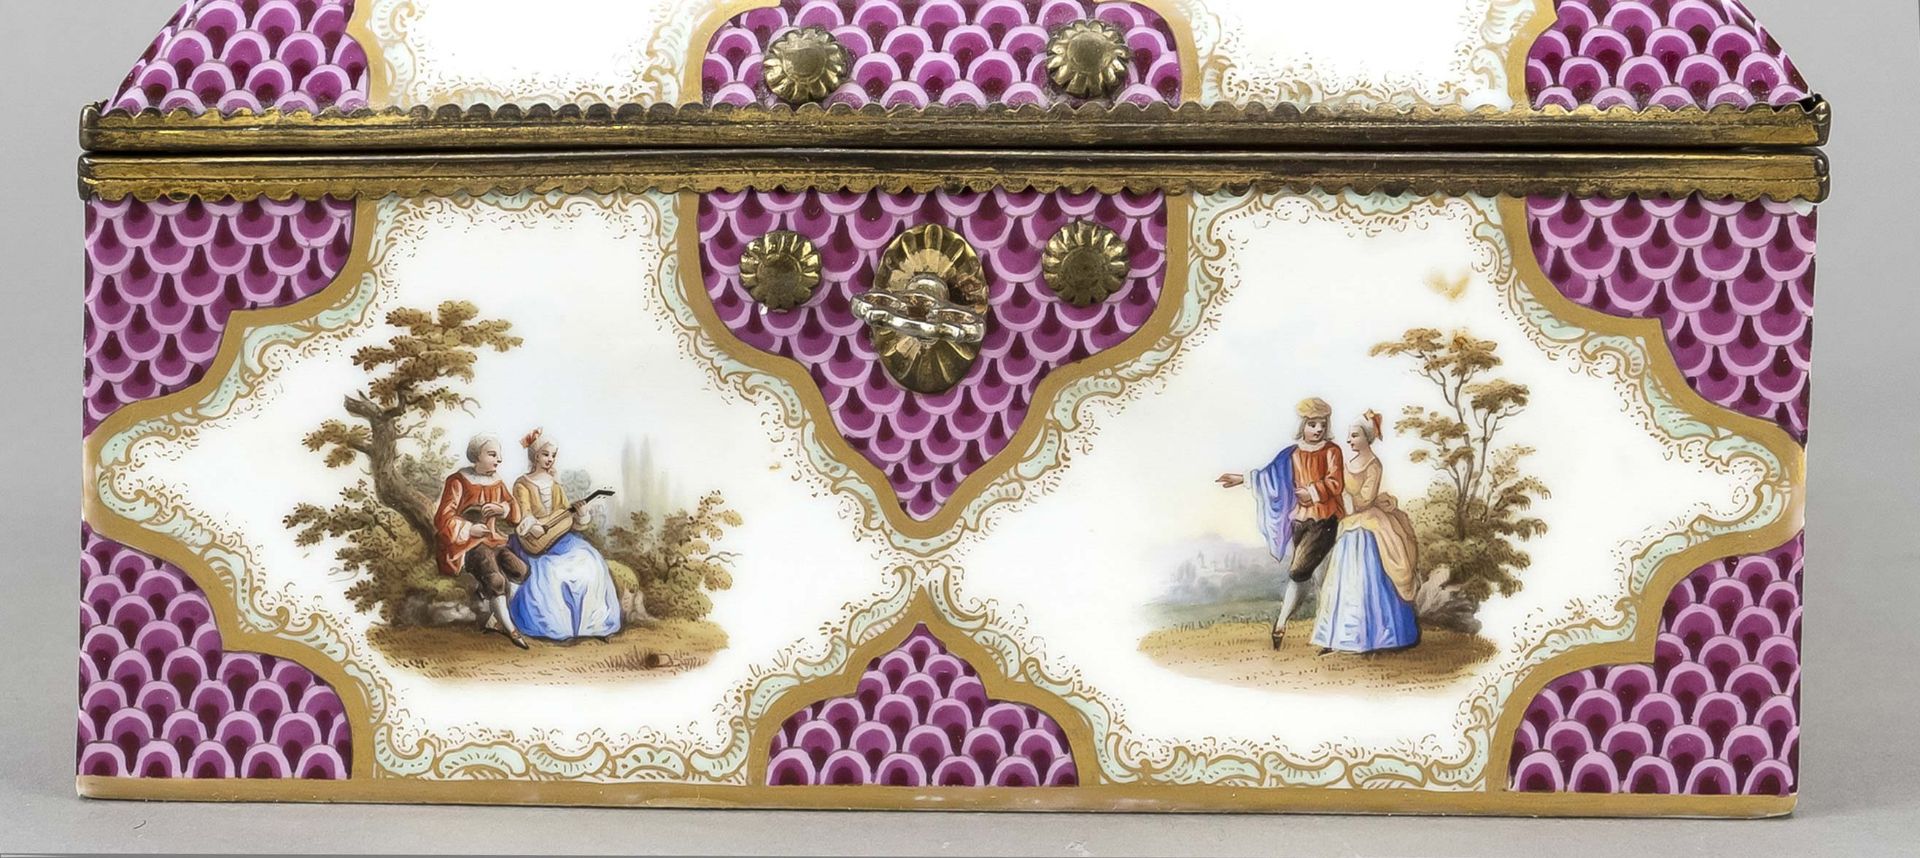 Lidded box in the style of Meissen, w. 18/19th c., fine polychrome painting with gallant couples - Image 4 of 7